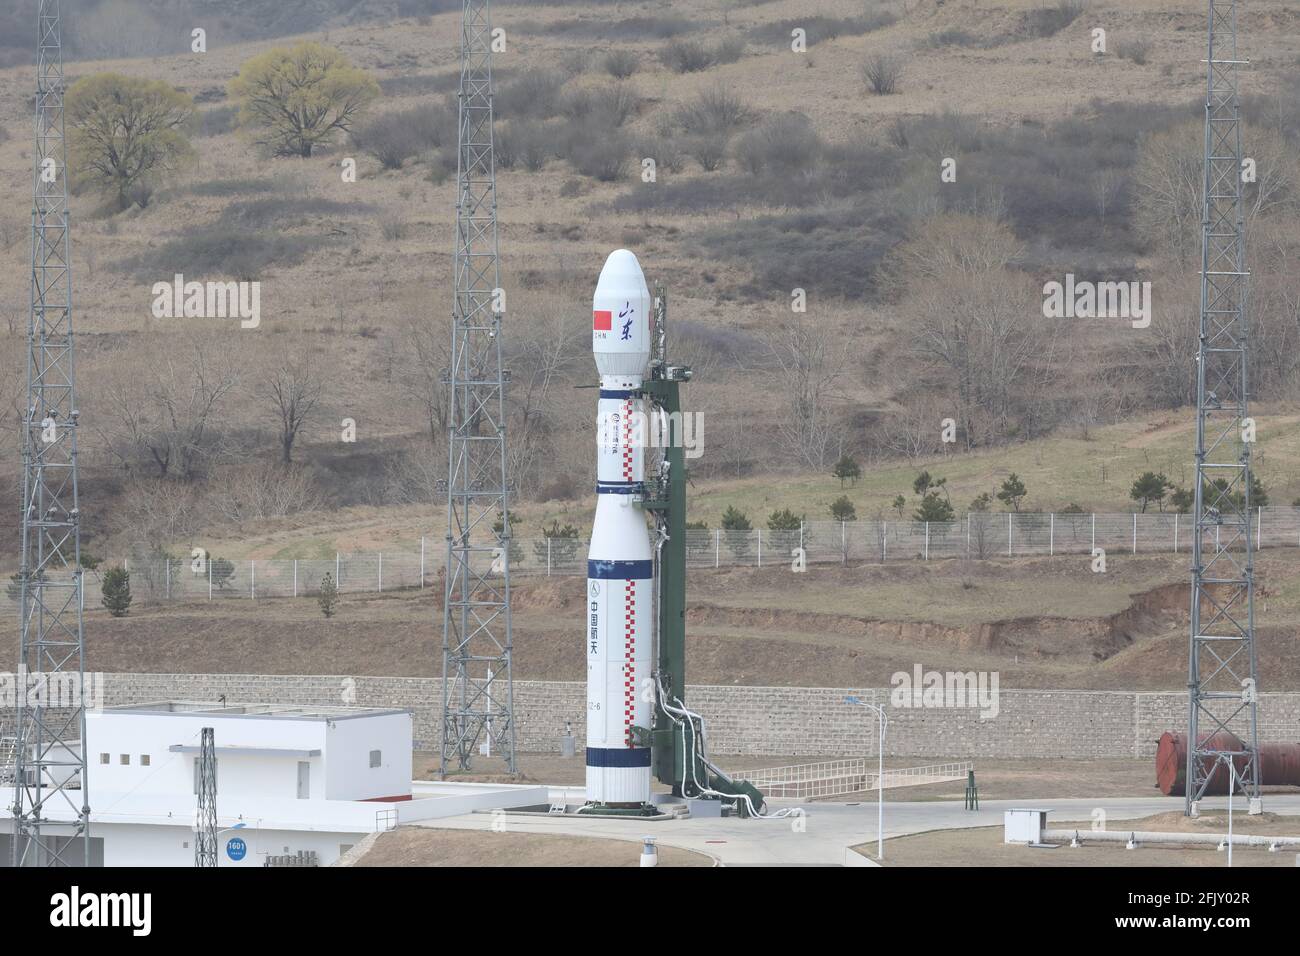 Shanxi, China. 27th Apr, 2021. A Long March-6 rocket prepares to blast off from the Taiyuan Satellite Launch Center in north China's Shanxi Province, April 27, 2021, sending nine commercial satellites into space. The satellites, including Qilu-1 and Qilu-4, have entered their planned orbits and will provide east China's Shandong Province with remote sensing services for land survey, urban construction, agriculture, forestry, energy, disaster prevention and reduction. Credit: Xinhua/Alamy Live News Stock Photo